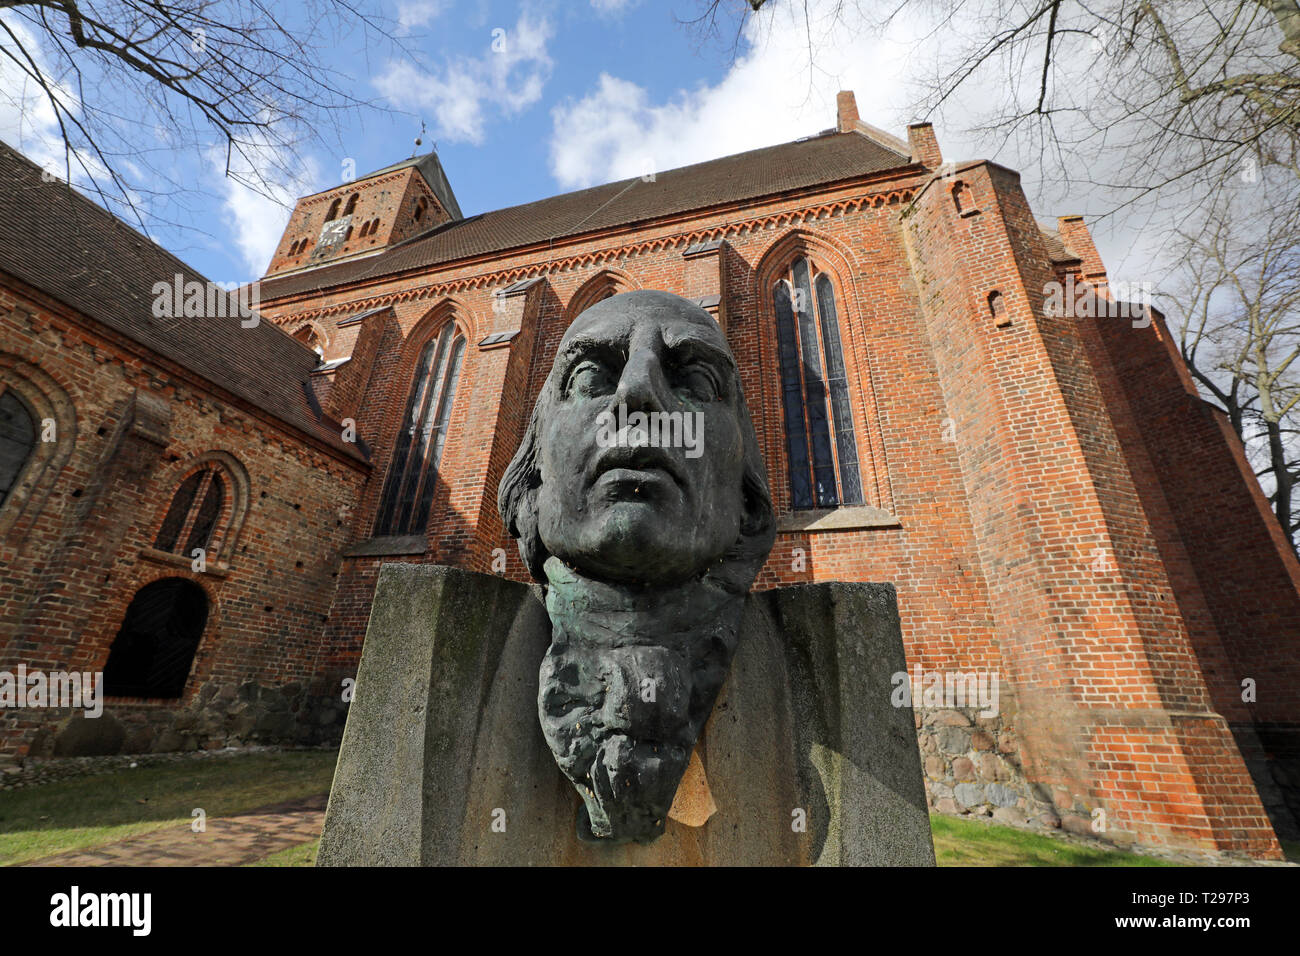 Penzlin, Germany. 25th Mar, 2019. A memorial, created by Walther Preik, commemorates the poet and Homer translator Johann Heinrich Voss (1751-1826), who went to school in the opposite principal's house. On 29.03.2019 a house of literature will be opened in the former Voss school building. Credit: Bernd Wüstneck/dpa-Zentralbild/ZB/dpa/Alamy Live News Stock Photo